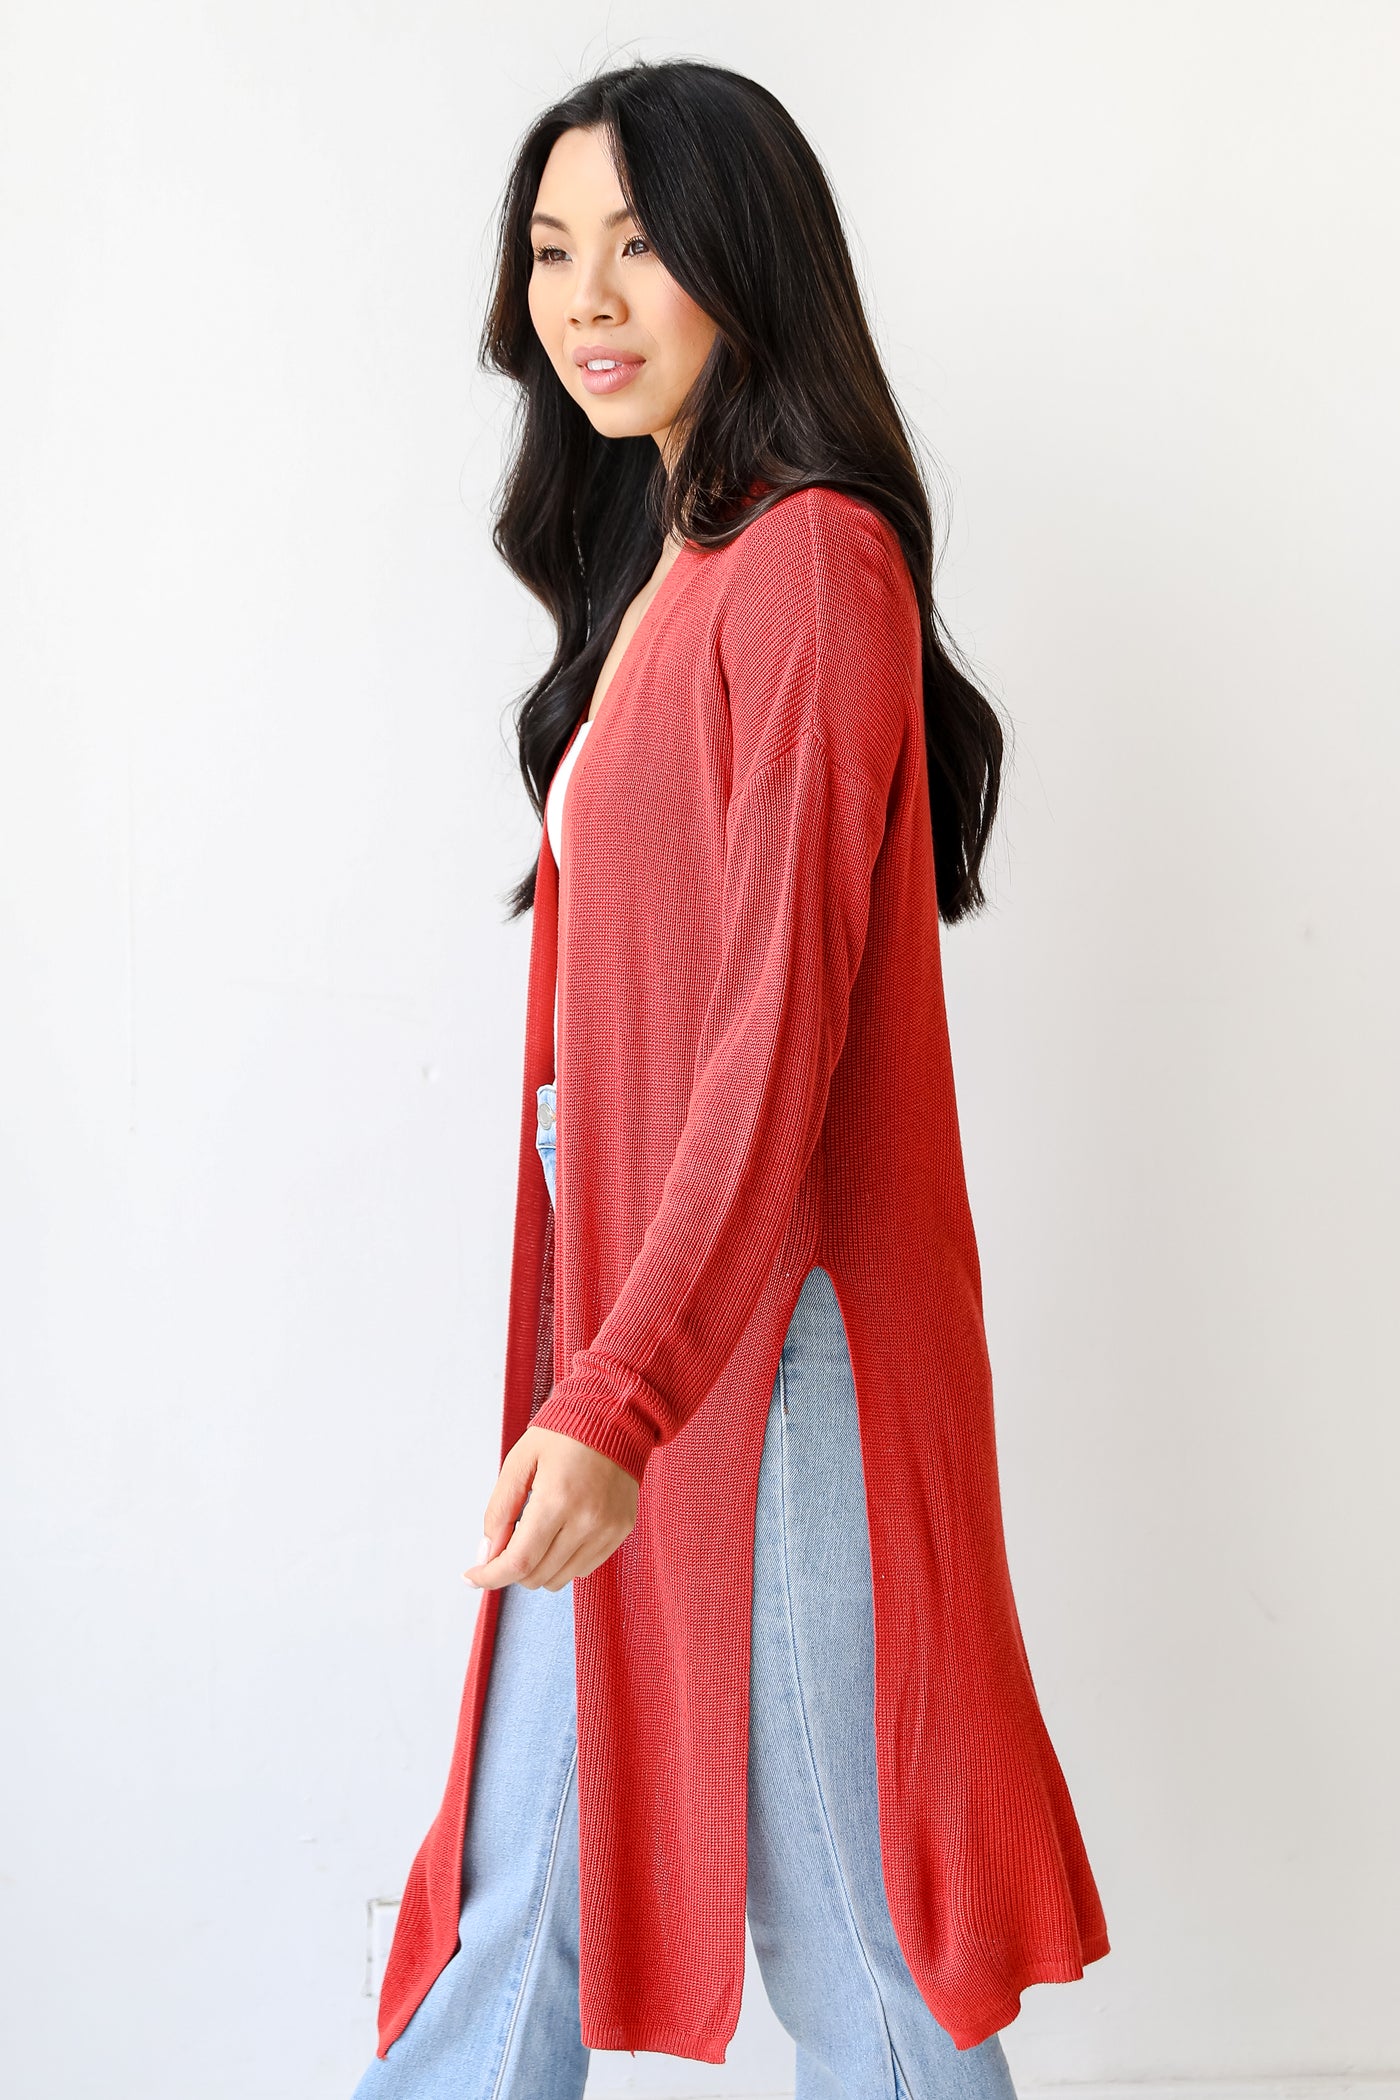 Cardigan in coral side view